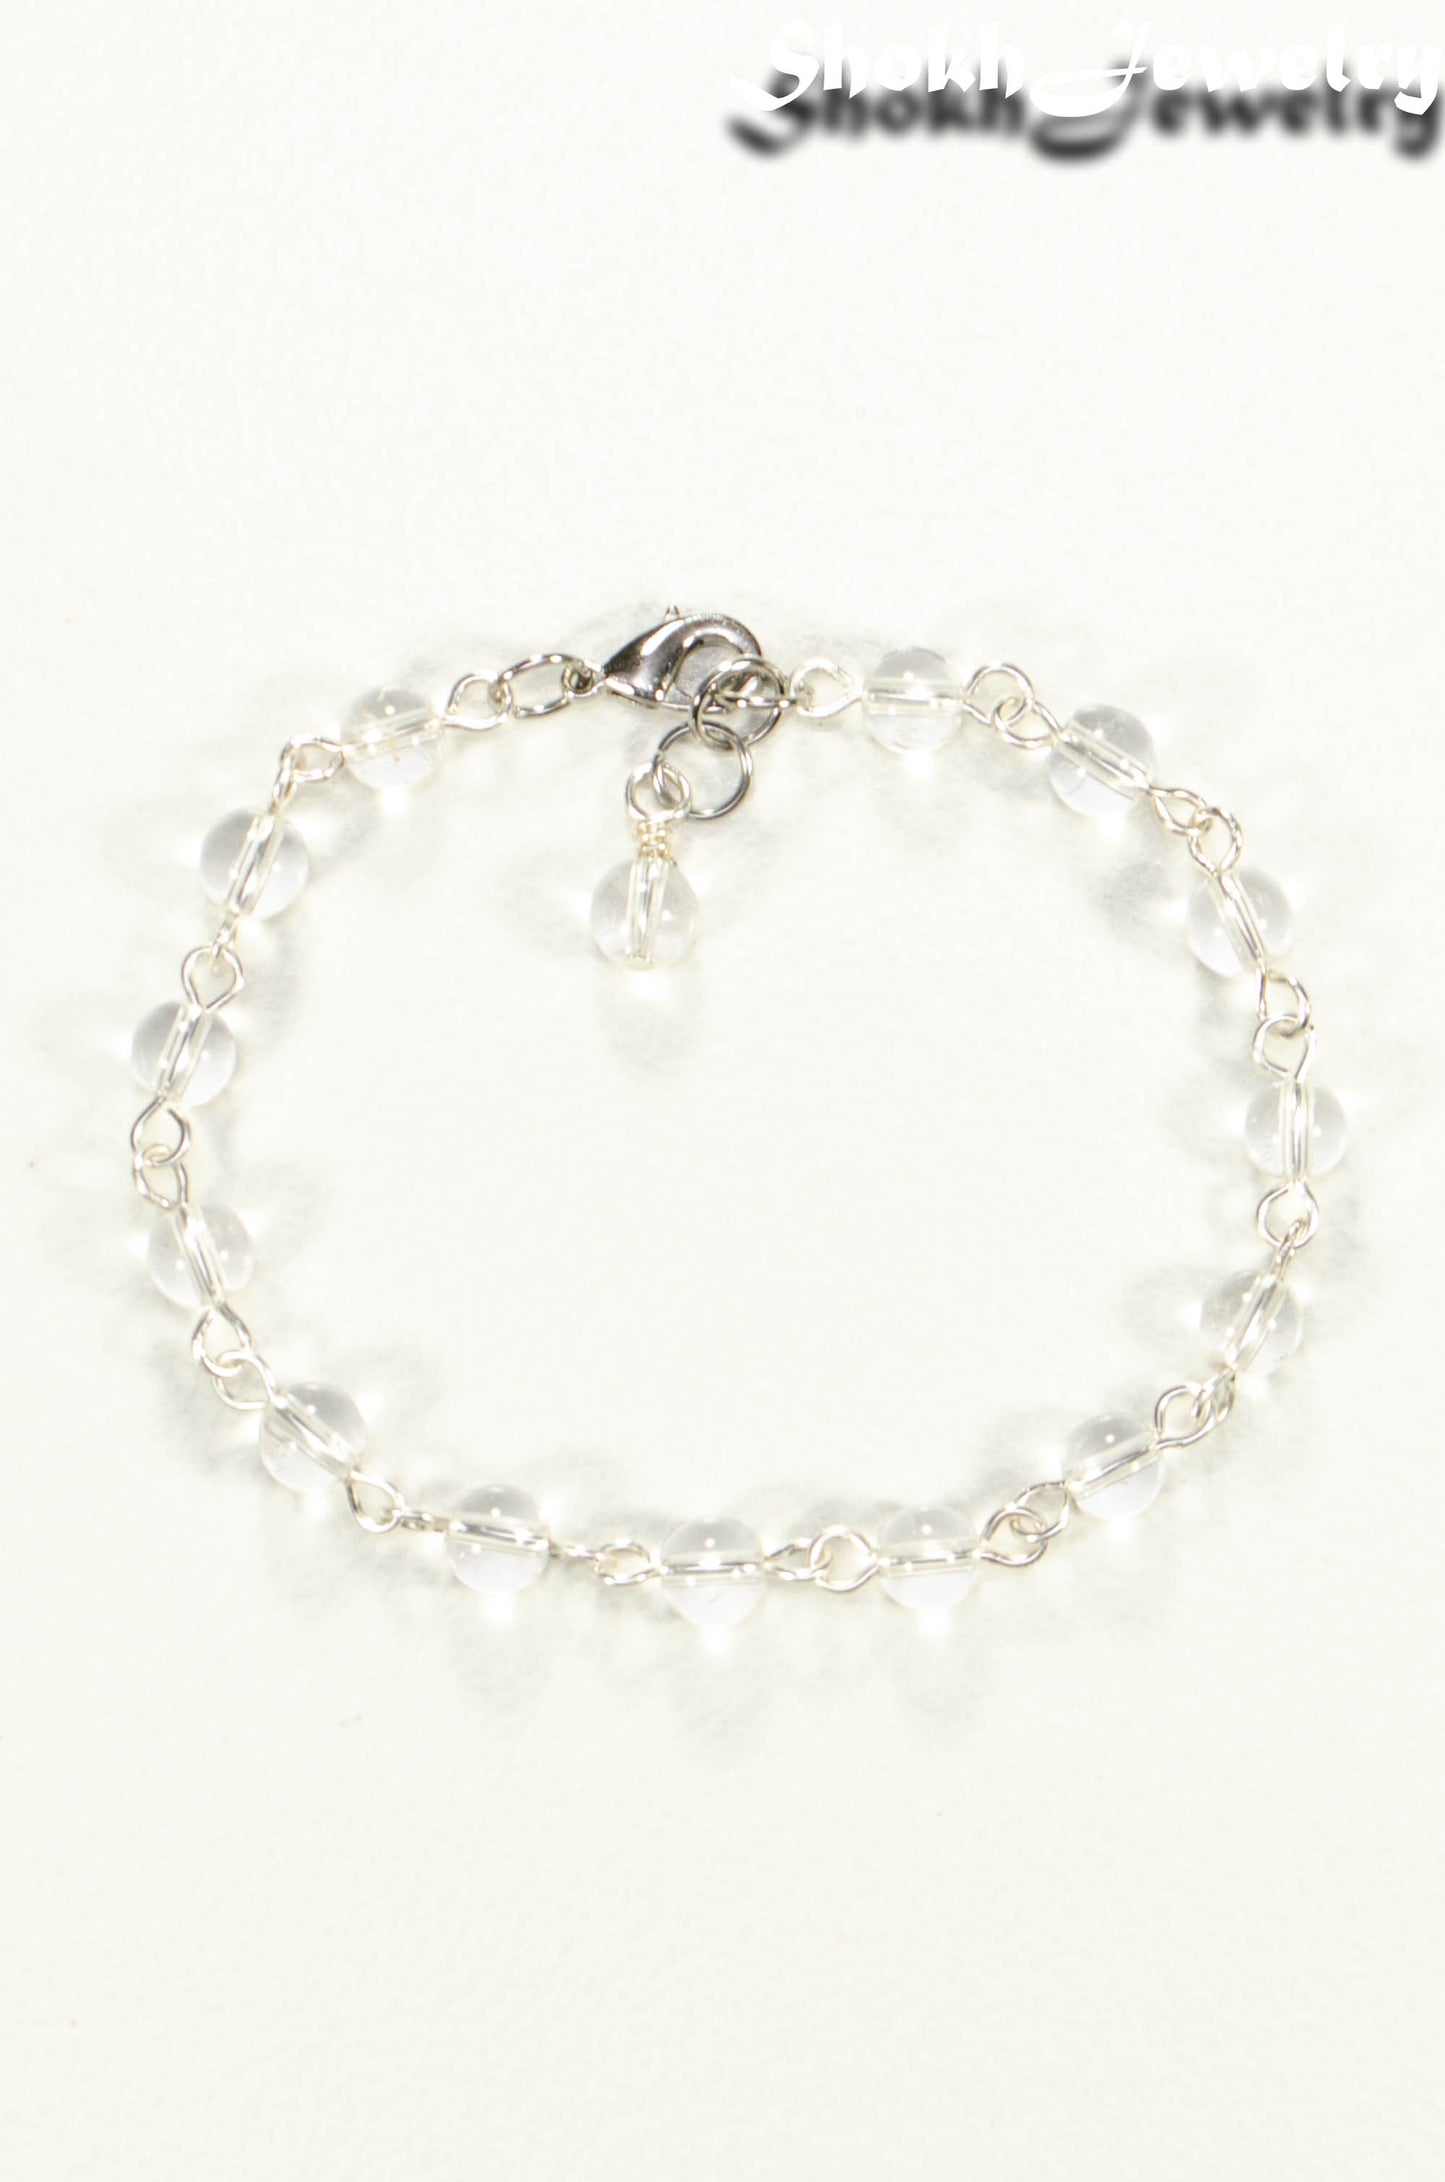 Close up of Handmade Clear Quartz Link Chain Anklet for Women.